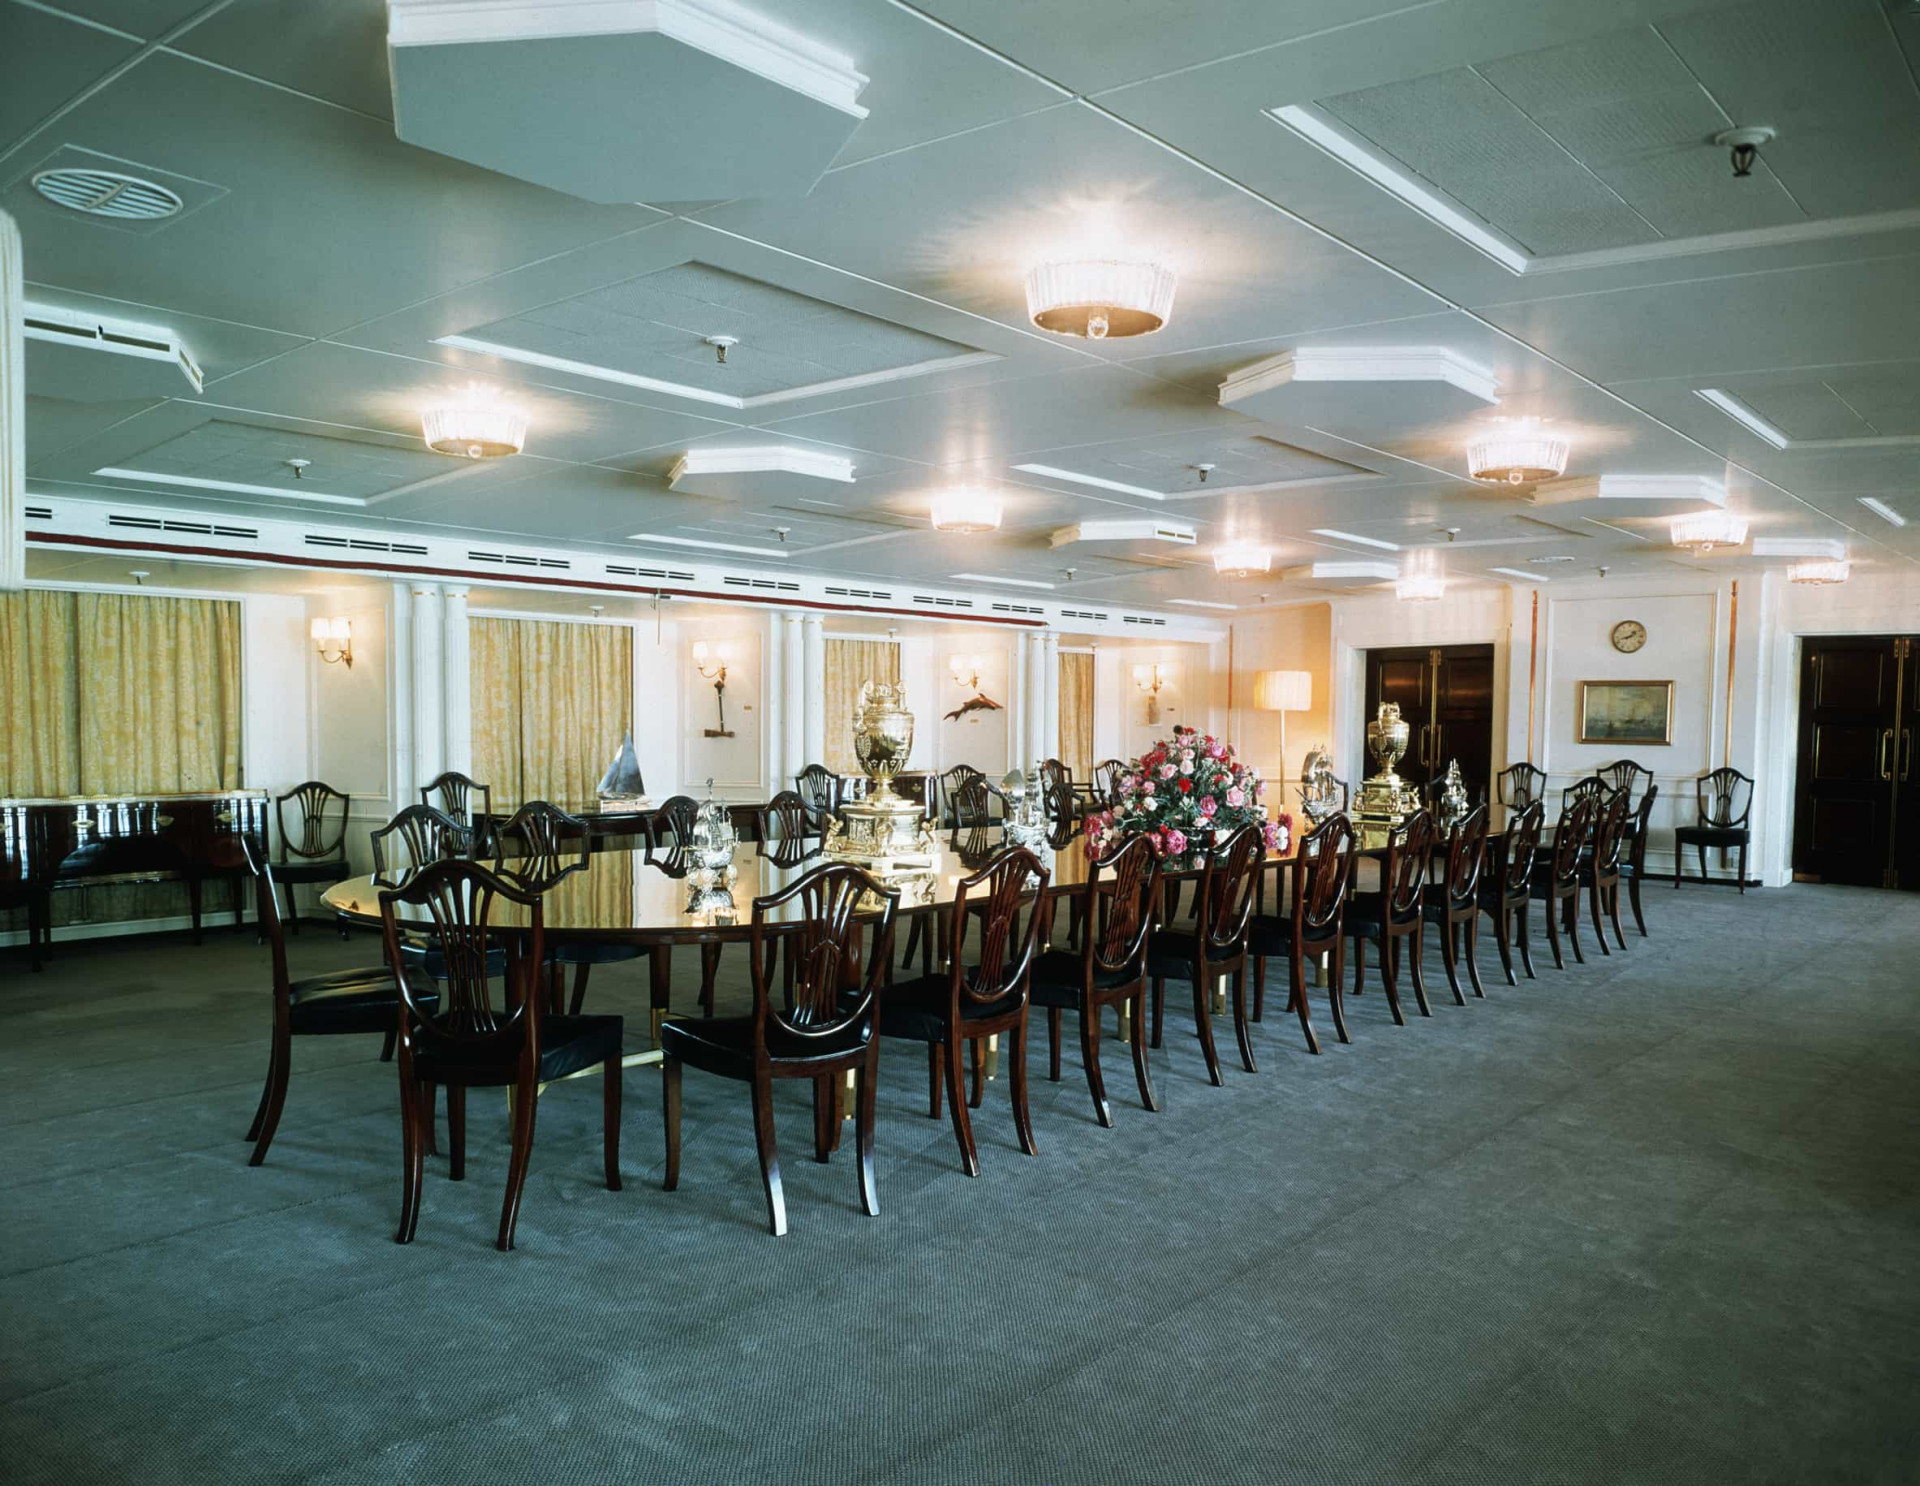 <p>The Reagan's dined in <em>Britannia</em>'s grand dining room (pictured), which could host up to 56 guests. The dining room was set within the ship's royal apartments and included a lounge, drawing room, and guest bedrooms.</p><p>You may also like:<a href="https://www.starsinsider.com/n/394229?utm_source=msn.com&utm_medium=display&utm_campaign=referral_description&utm_content=474709v1en-us"> All the ways Leonardo DiCaprio spends his millions</a></p>